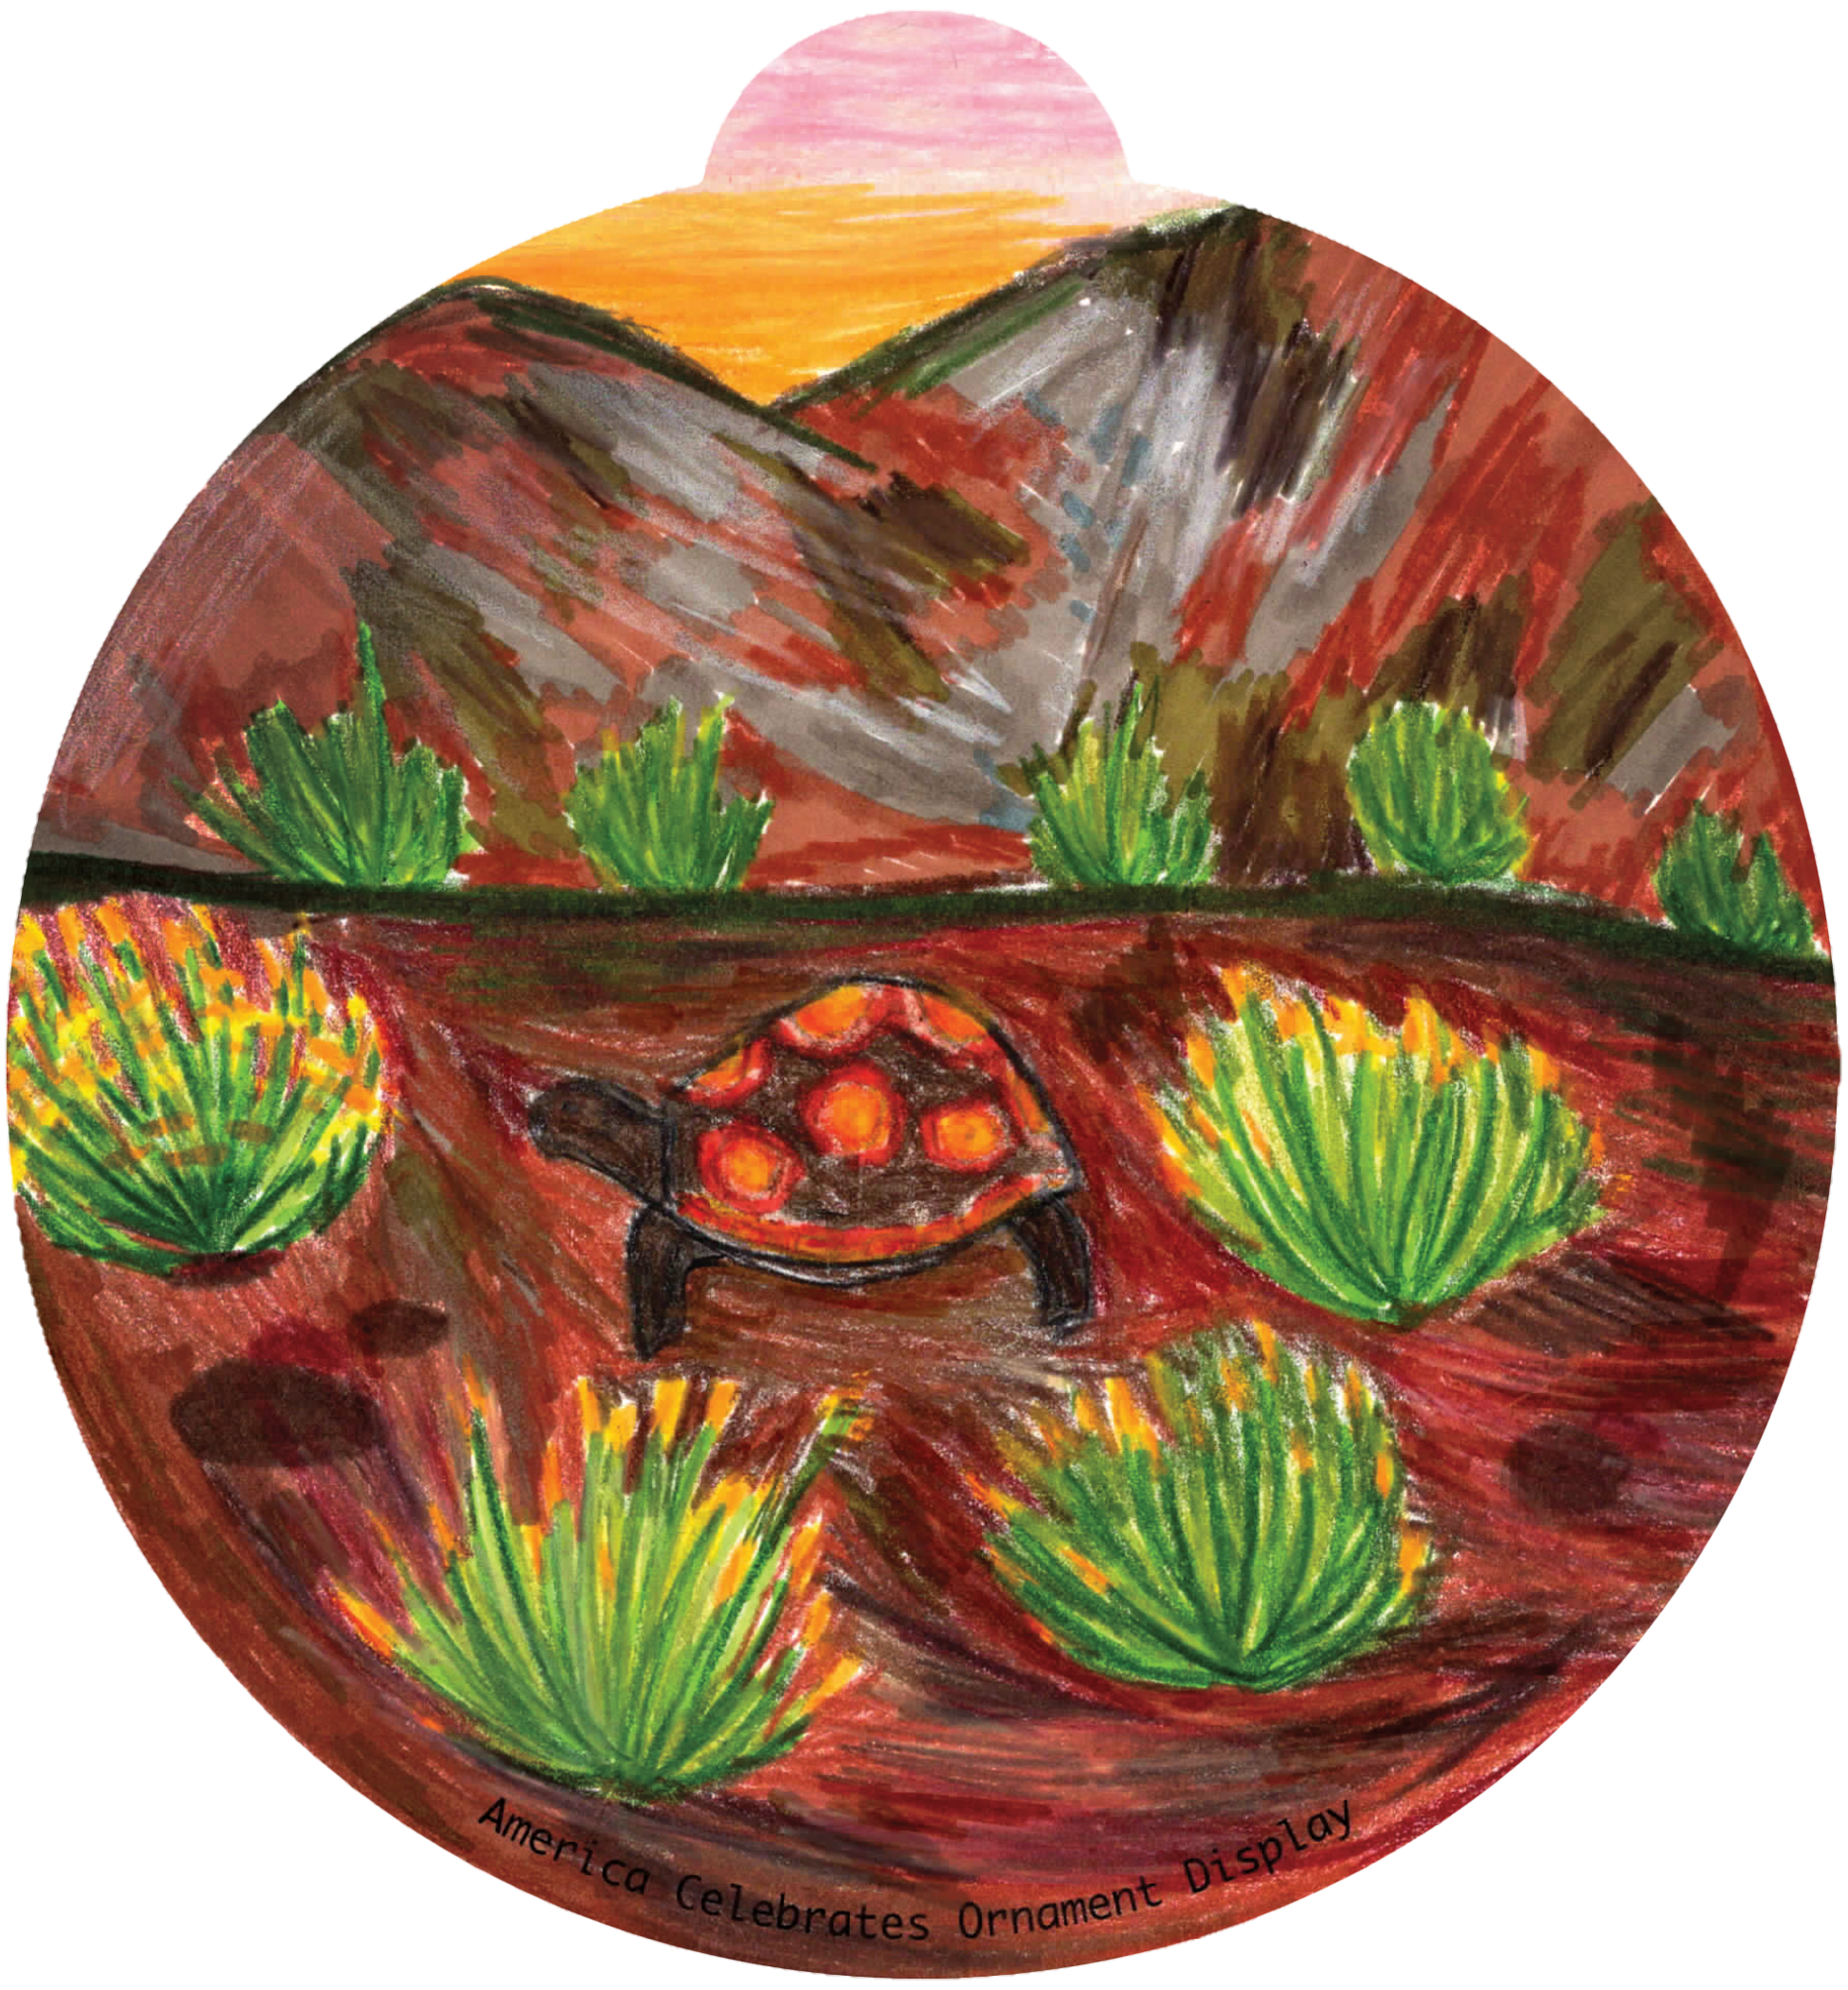 ornament depicting a turtle walking along bunches of cacti in a desert